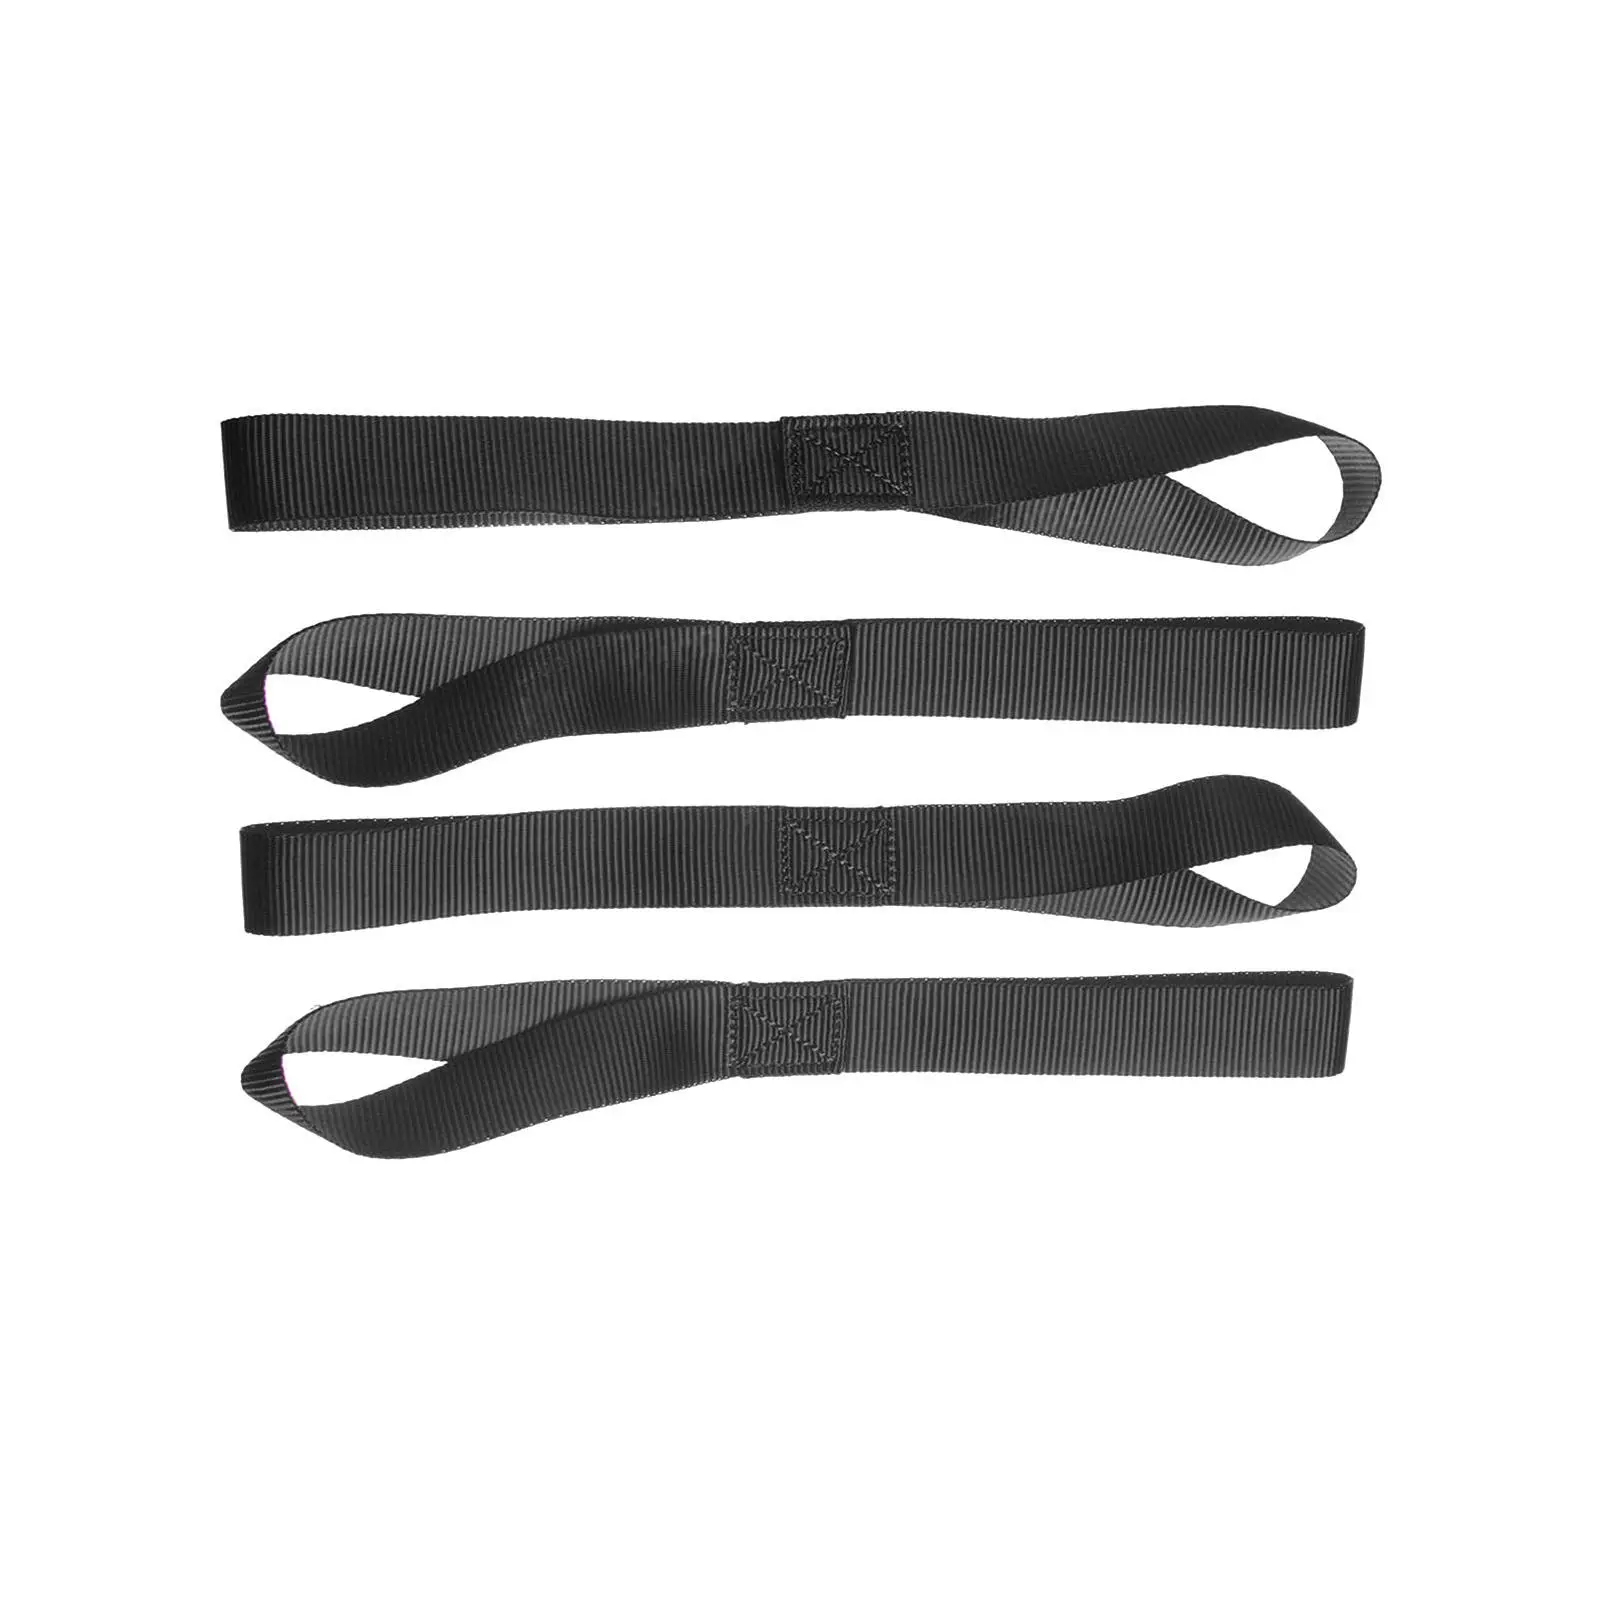 5 Pieces Soft Loop Heavy Duty for Motorcycle Bikes Reinforced Truck Boat Garden High Strength Nylon Motorcycle Tie-down Straps